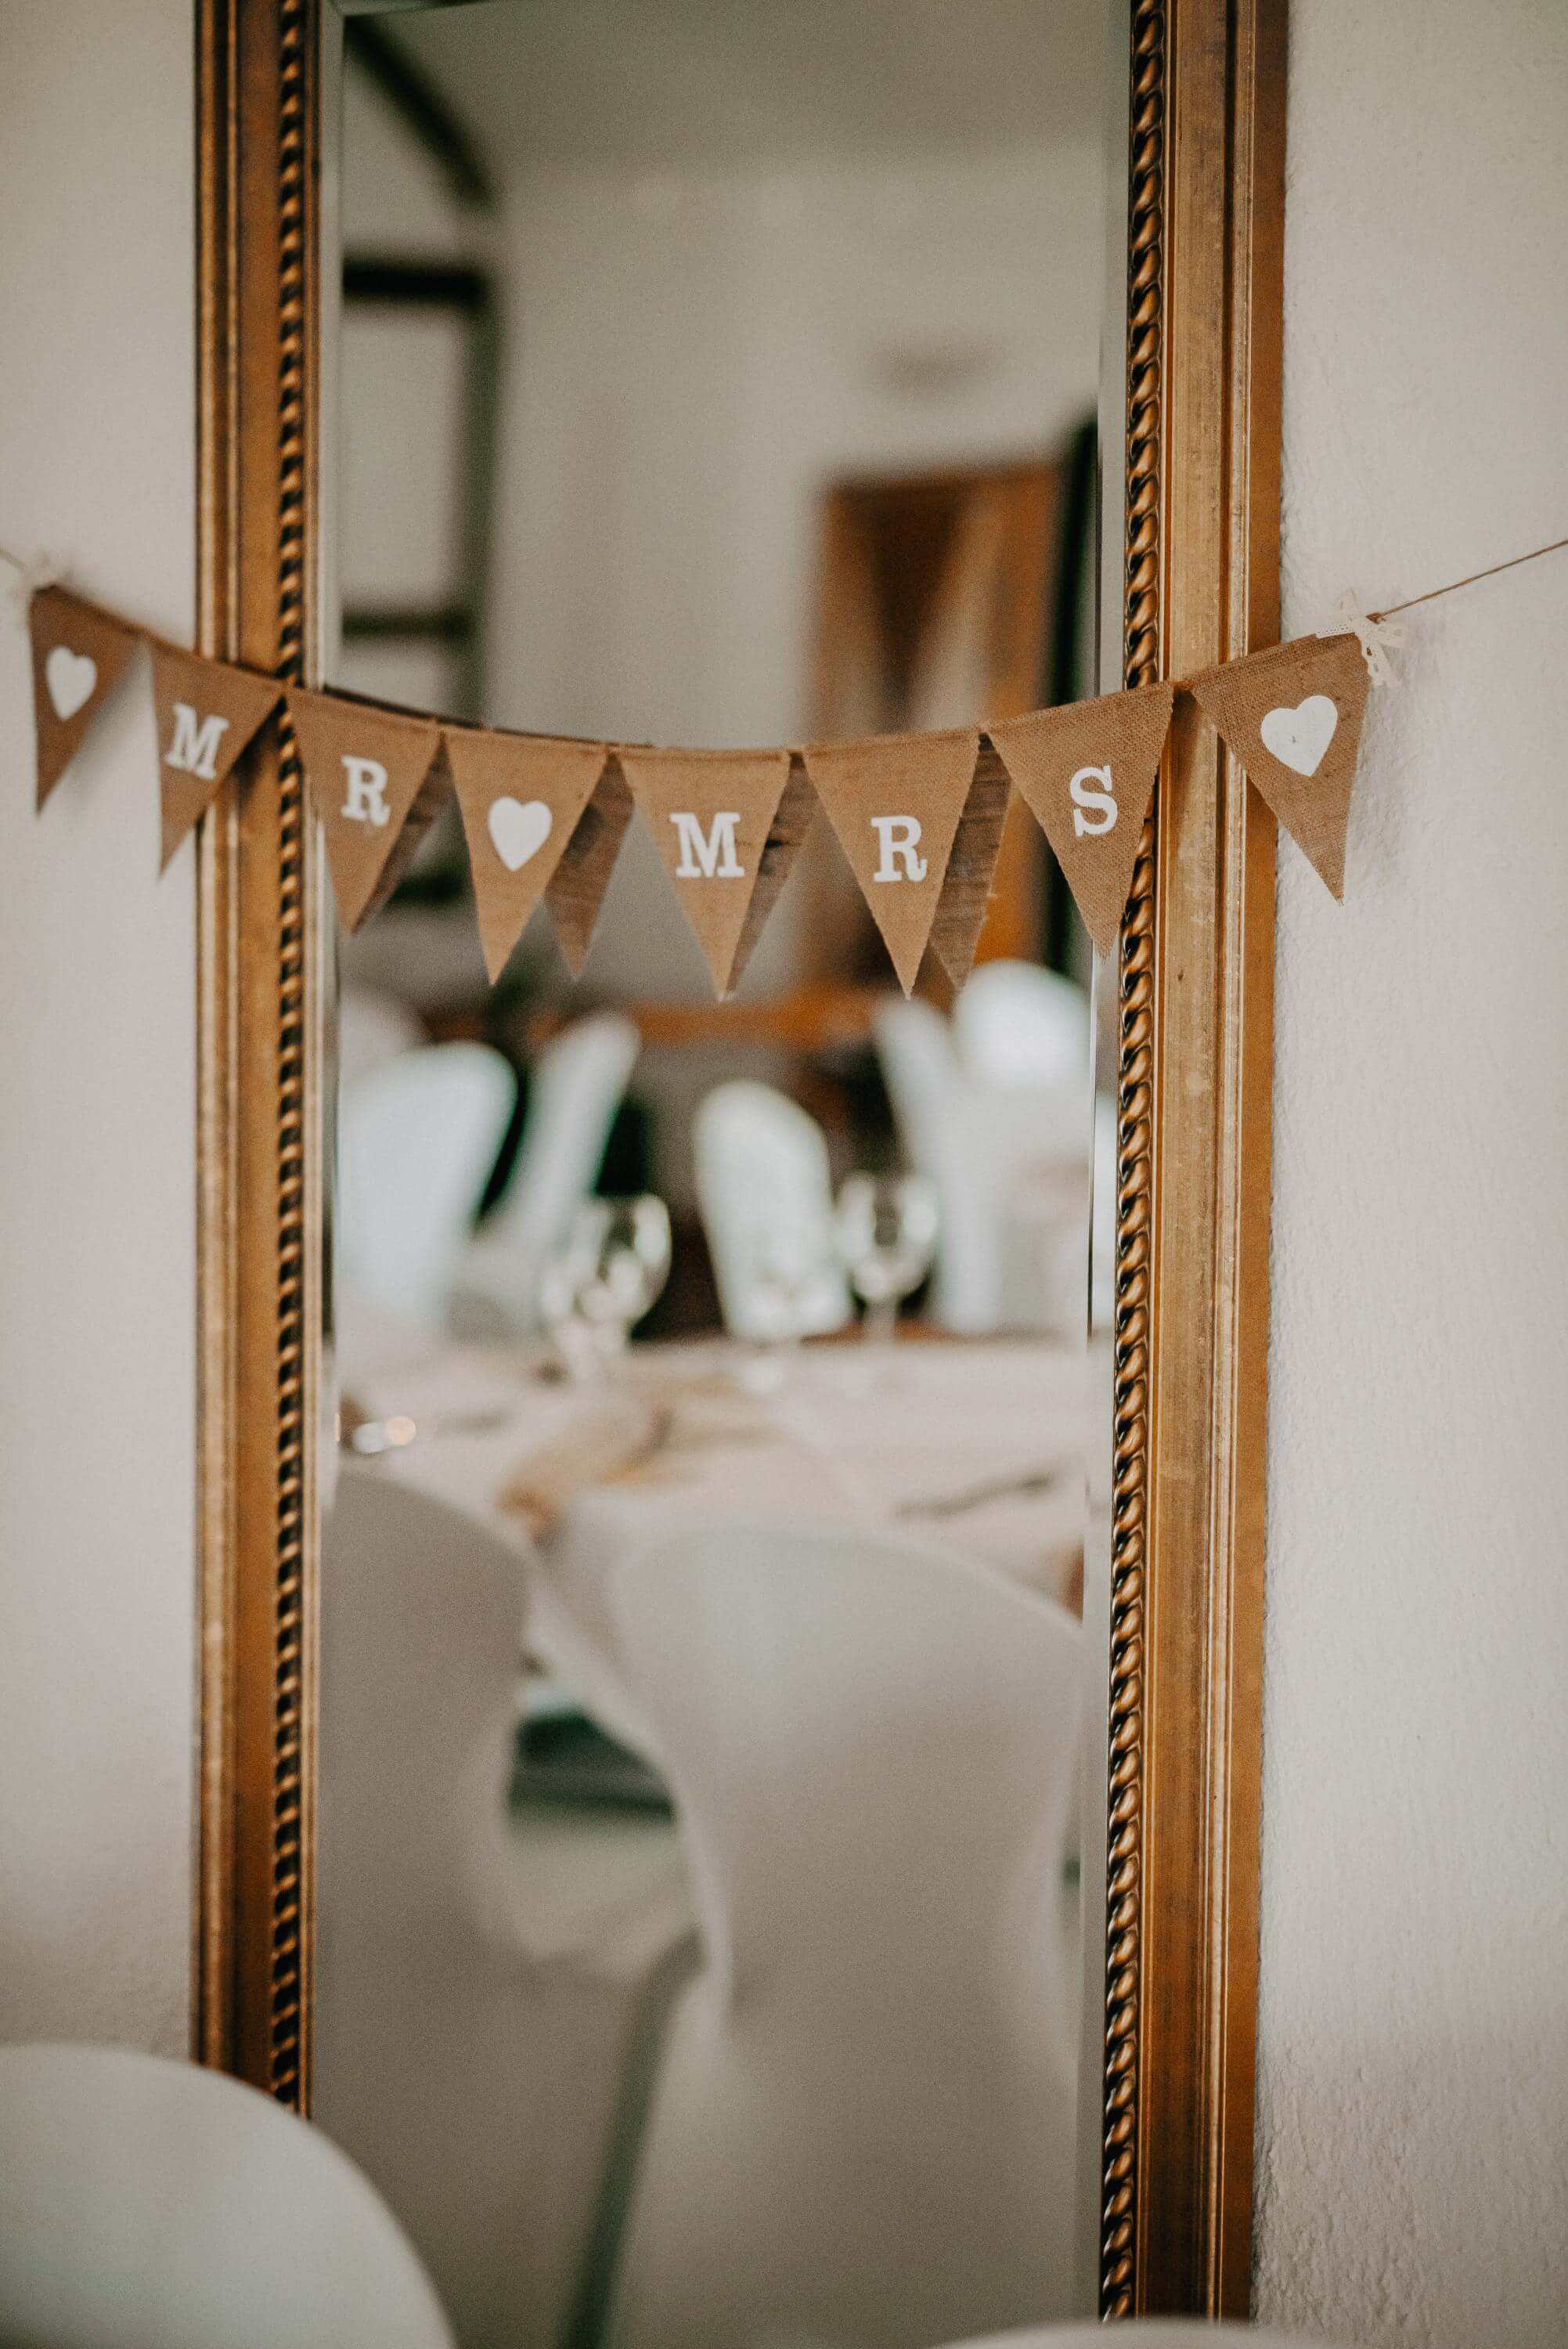 A pennant chain with the motif 'Mrs & Mr' for the wedding hangs on the wall in front of a large long mirror with a magnificent frame. In the mirror you can see a chair with a white cover at a round table for the wedding party.